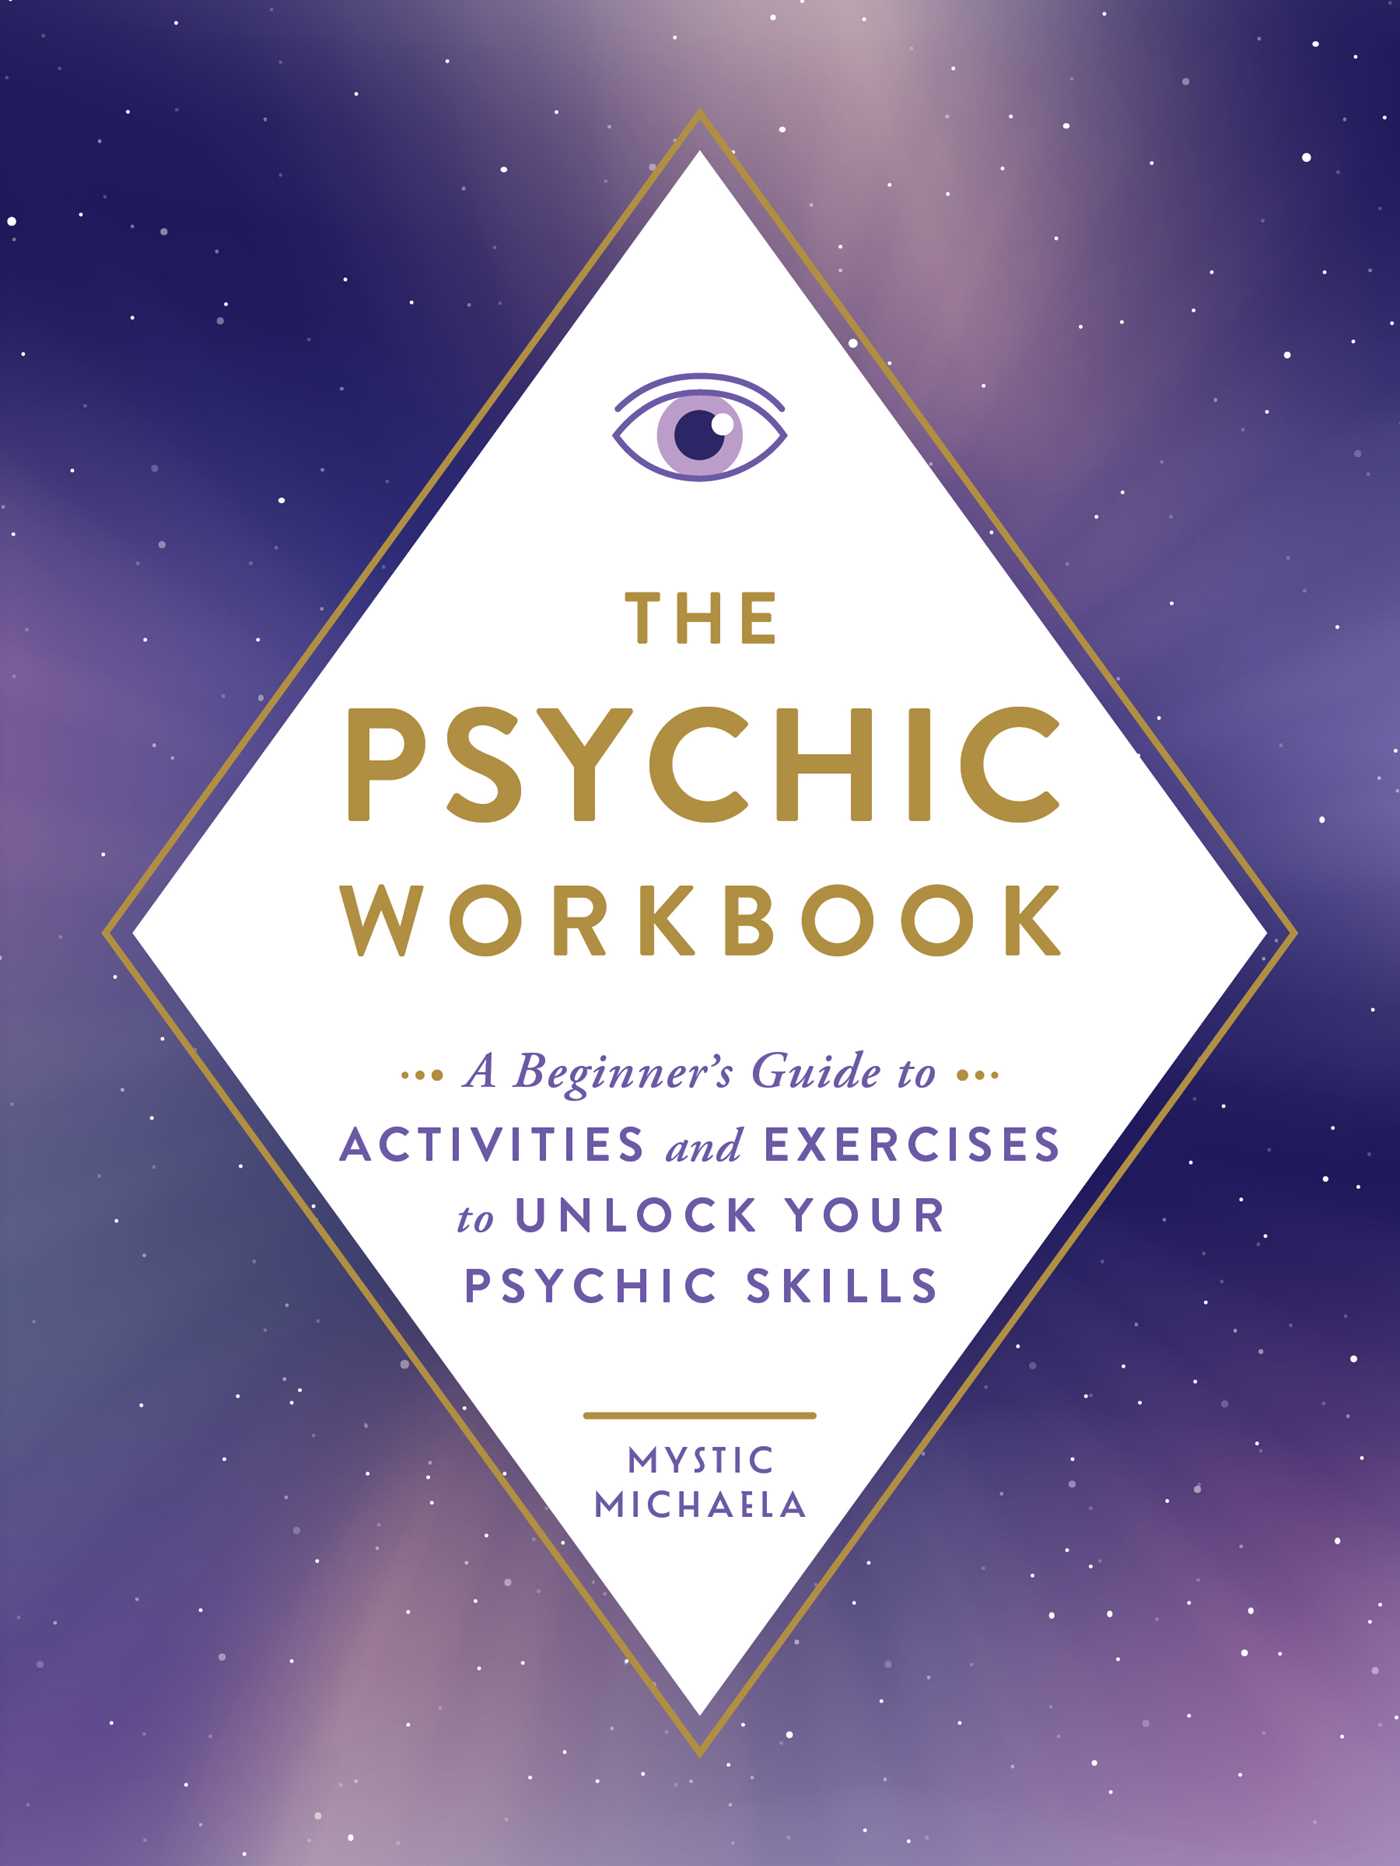 The Psychic Workbook : A Beginner's Guide to Activities and Exercises to Unlock Your Psychic Skills | Mystic Michaela (Auteur)